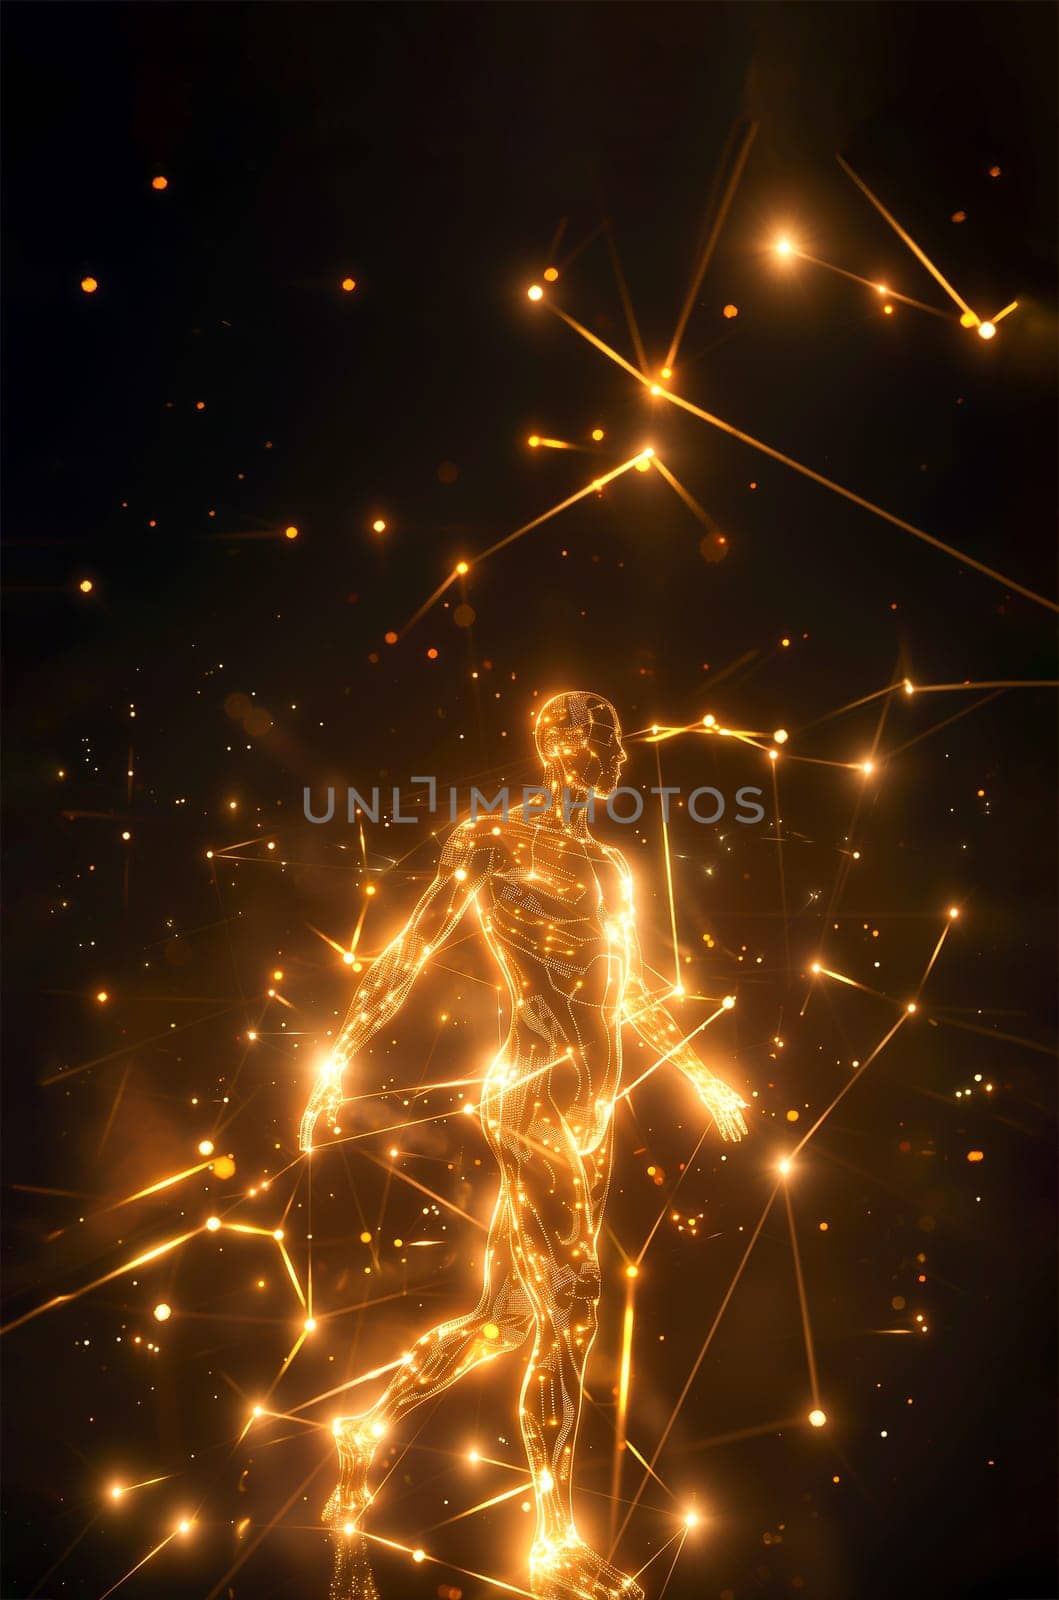 3D Man Hologram, Gold Glow Wireframe In Shape Of Human. Health, Science And Technology Concept In Dark And Golden Light. Esoteric, Astrology, Meditation, Energy Healing. Ai Generated. Vertical Plane by netatsi